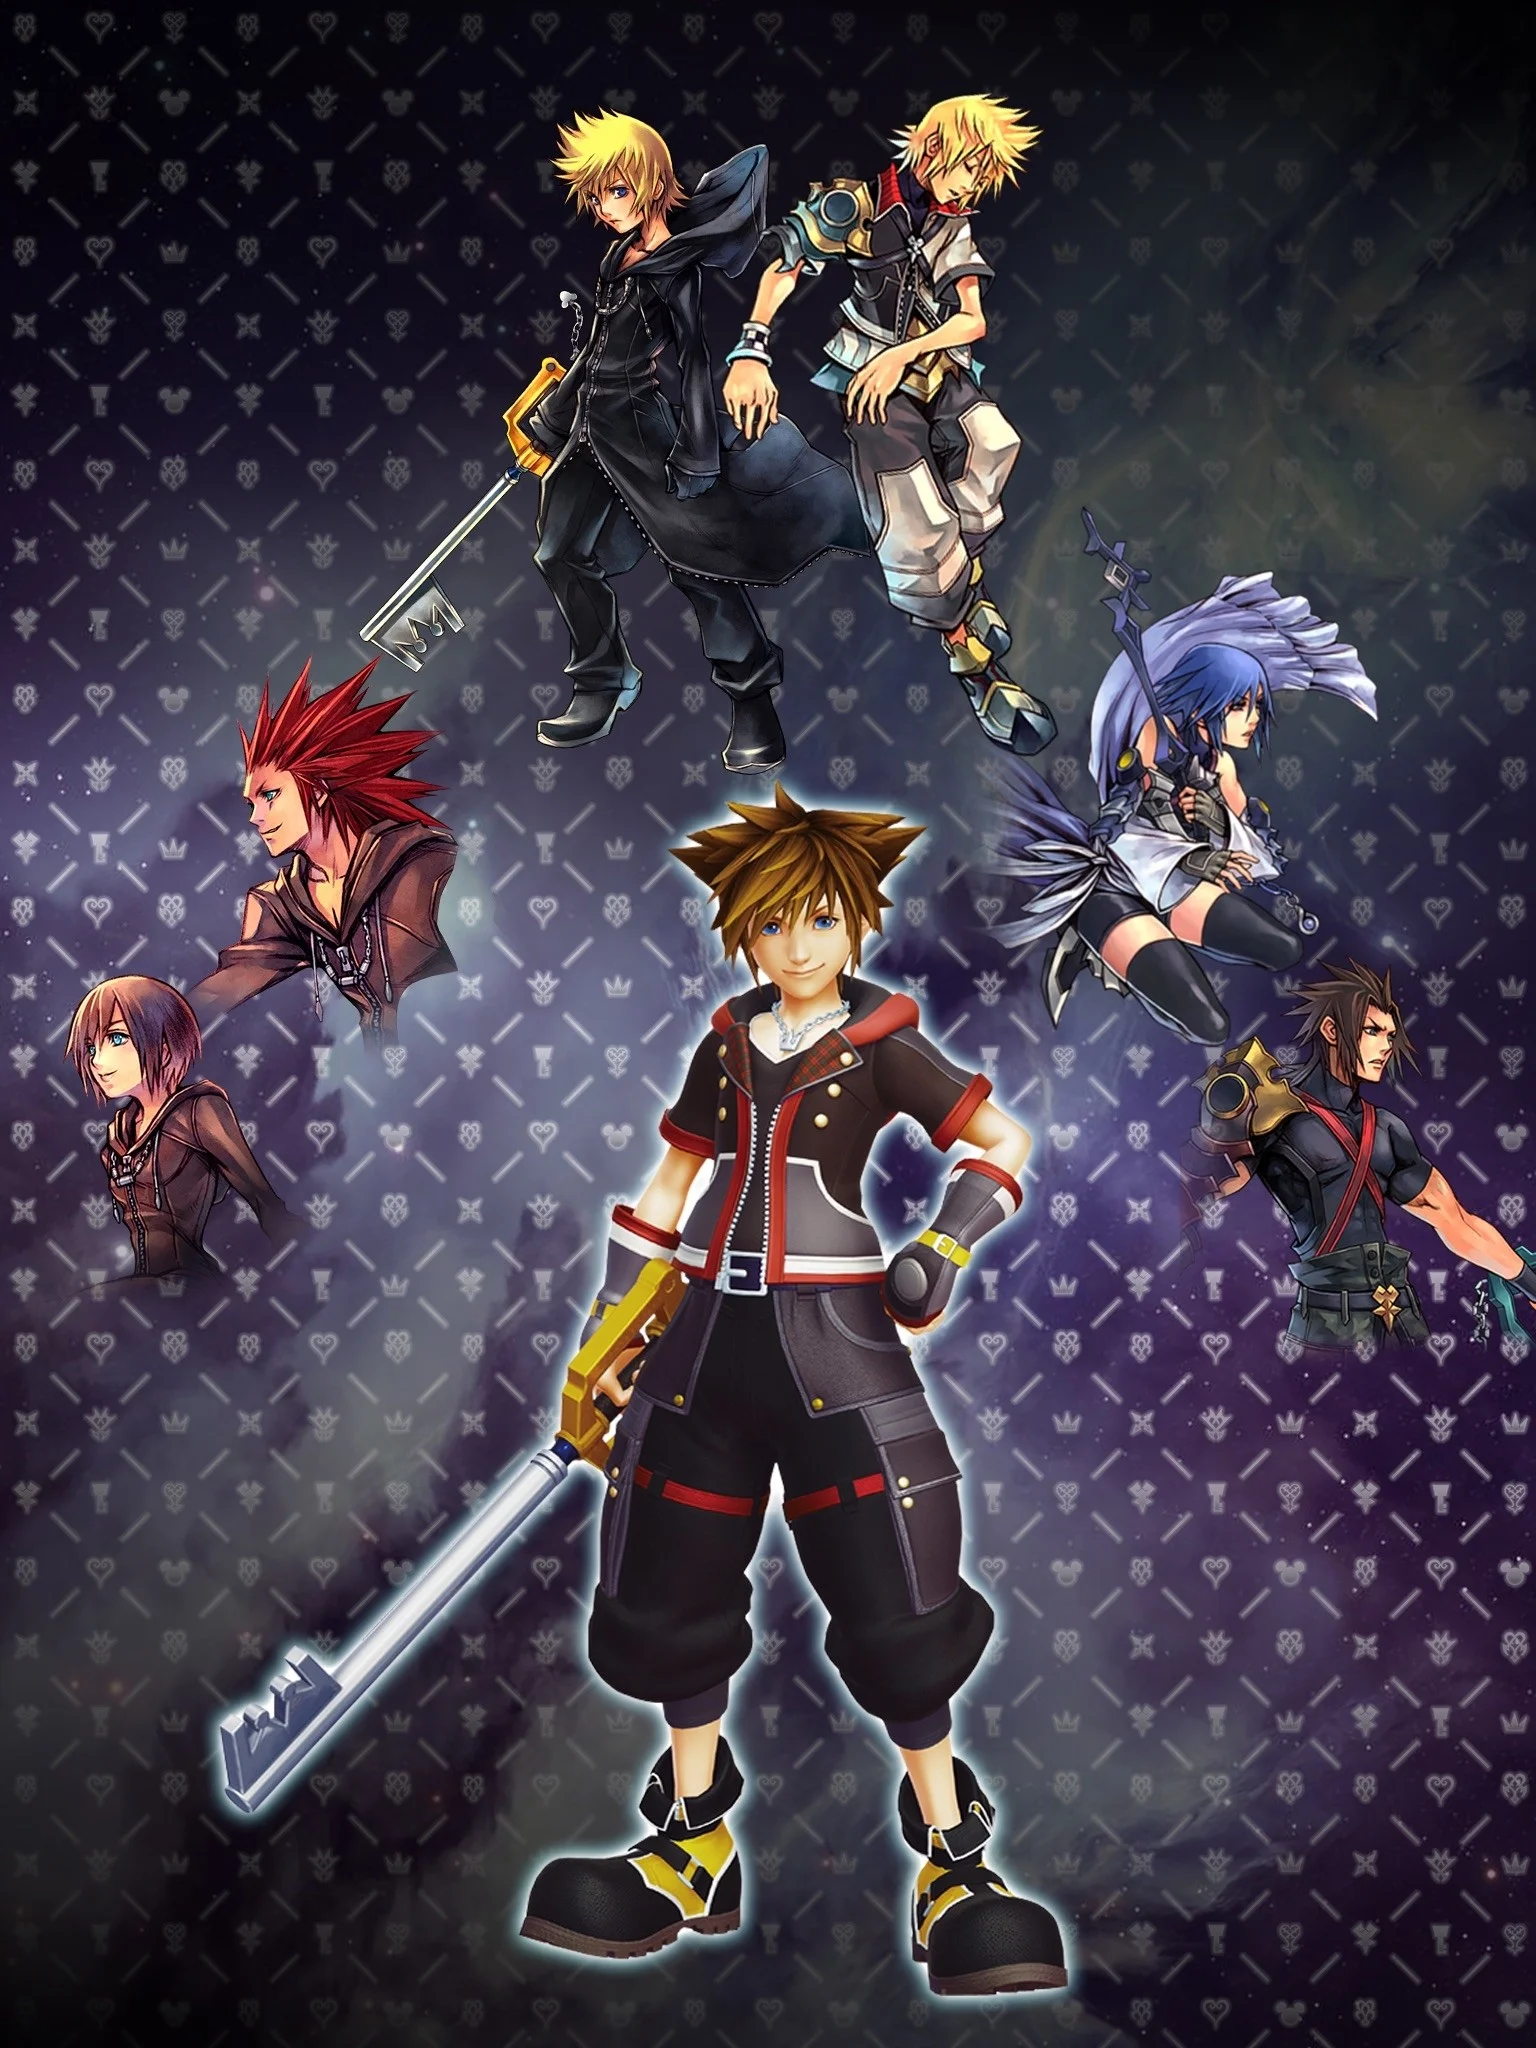 Kingdom hearts iphone wallpaper 493154 best images collections